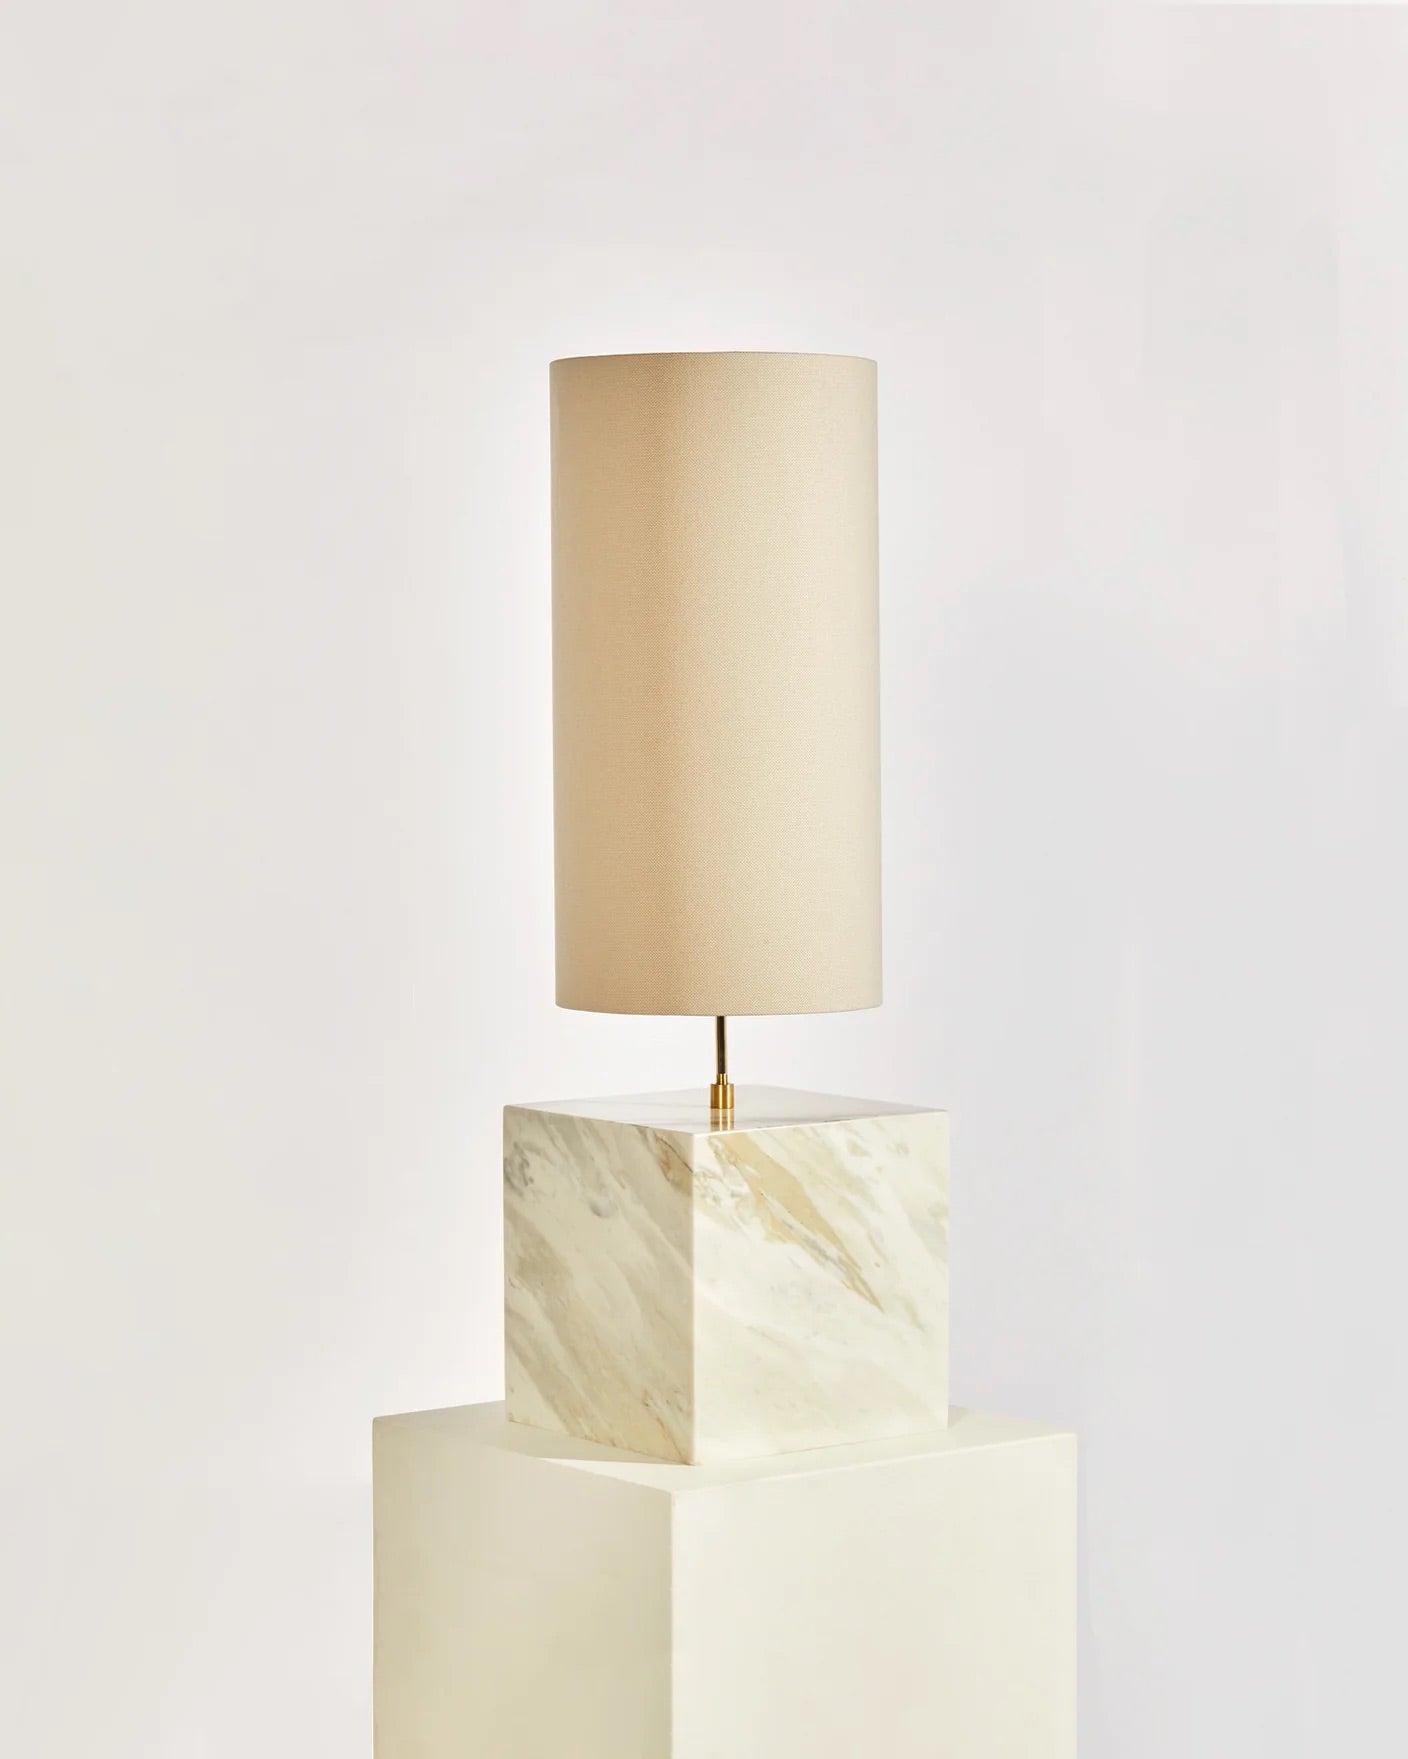 Cielo Marble & Brass Coexist Table Lamp 'Large' by Slash Objects - Floor Sample For Sale